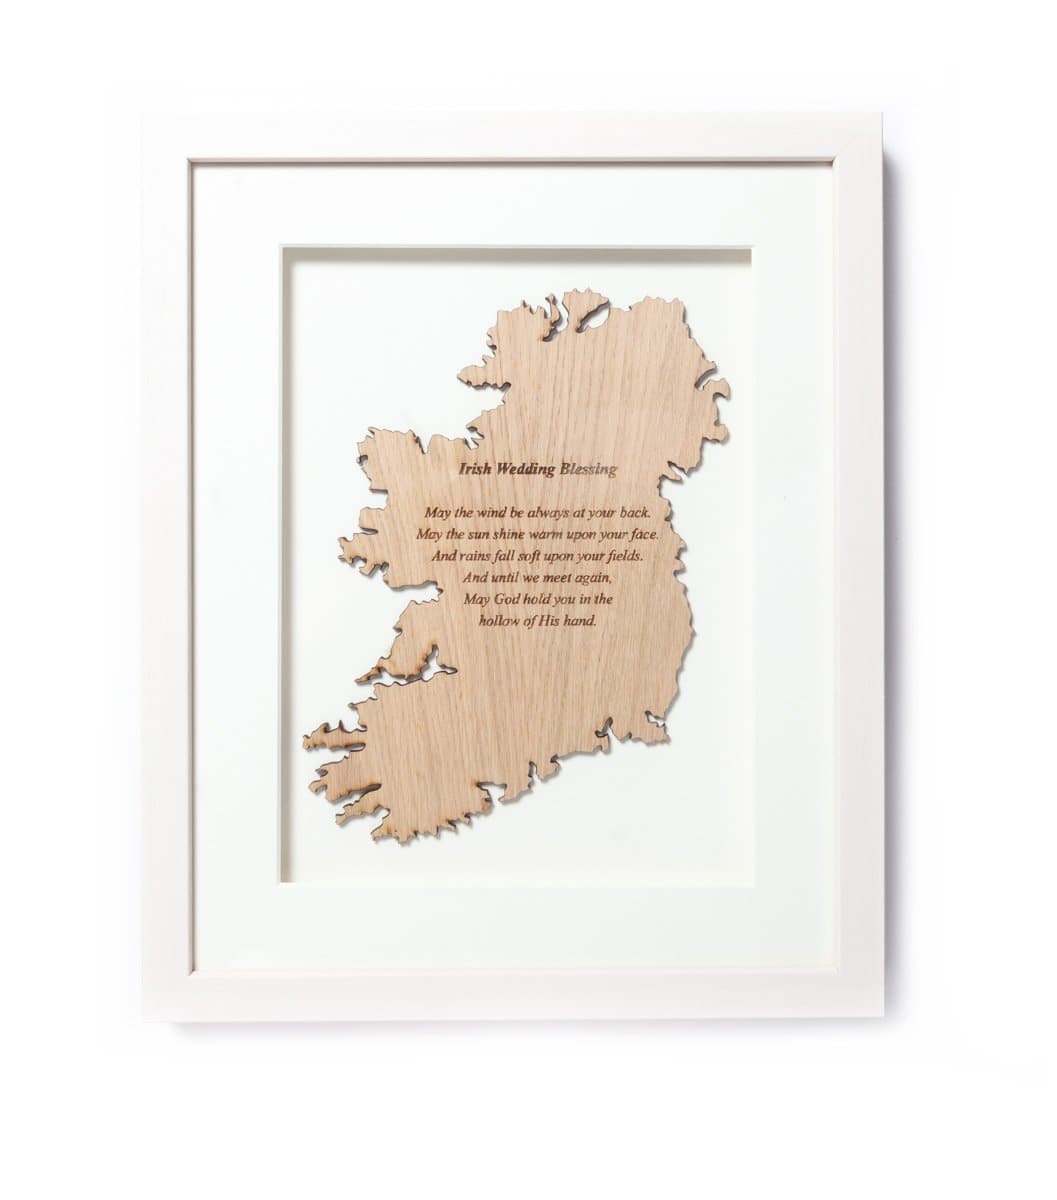 Irish Wedding Irish Blessing Framed Wall Decor Made in Ireland May the Wind Be At Your Back Unique Gift Crafted by Our Maker-Partner in Co. Meath